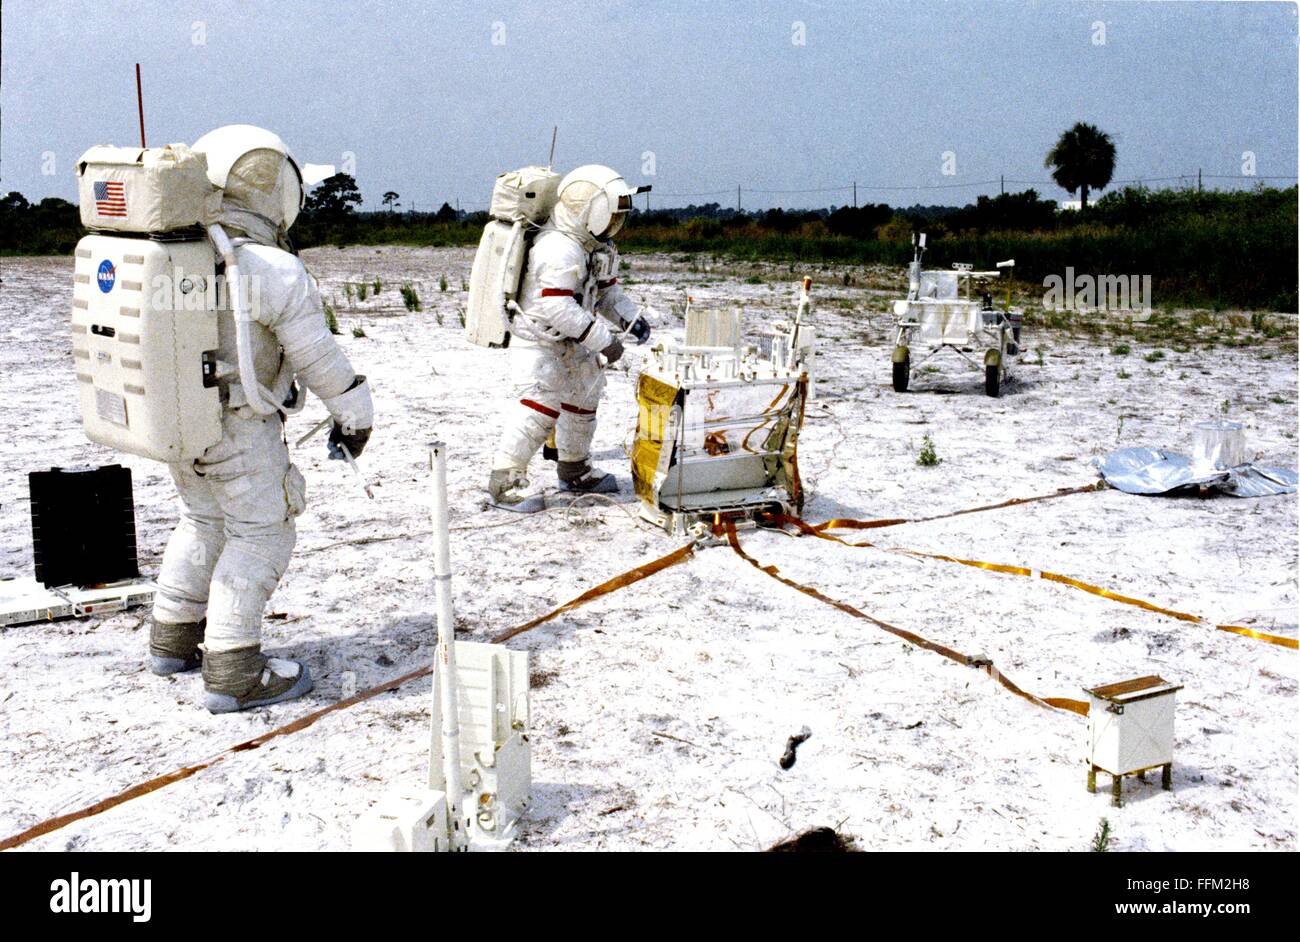 NASA Apollo 14 astronauts Alan B. Shepard Jr. (right), commander, and Edgar D. Mitchell, lunar module pilot, during lunar surface simulation training at the Kennedy Space Center July 18, 1970 in Cape Canaveral, Florida. Stock Photo